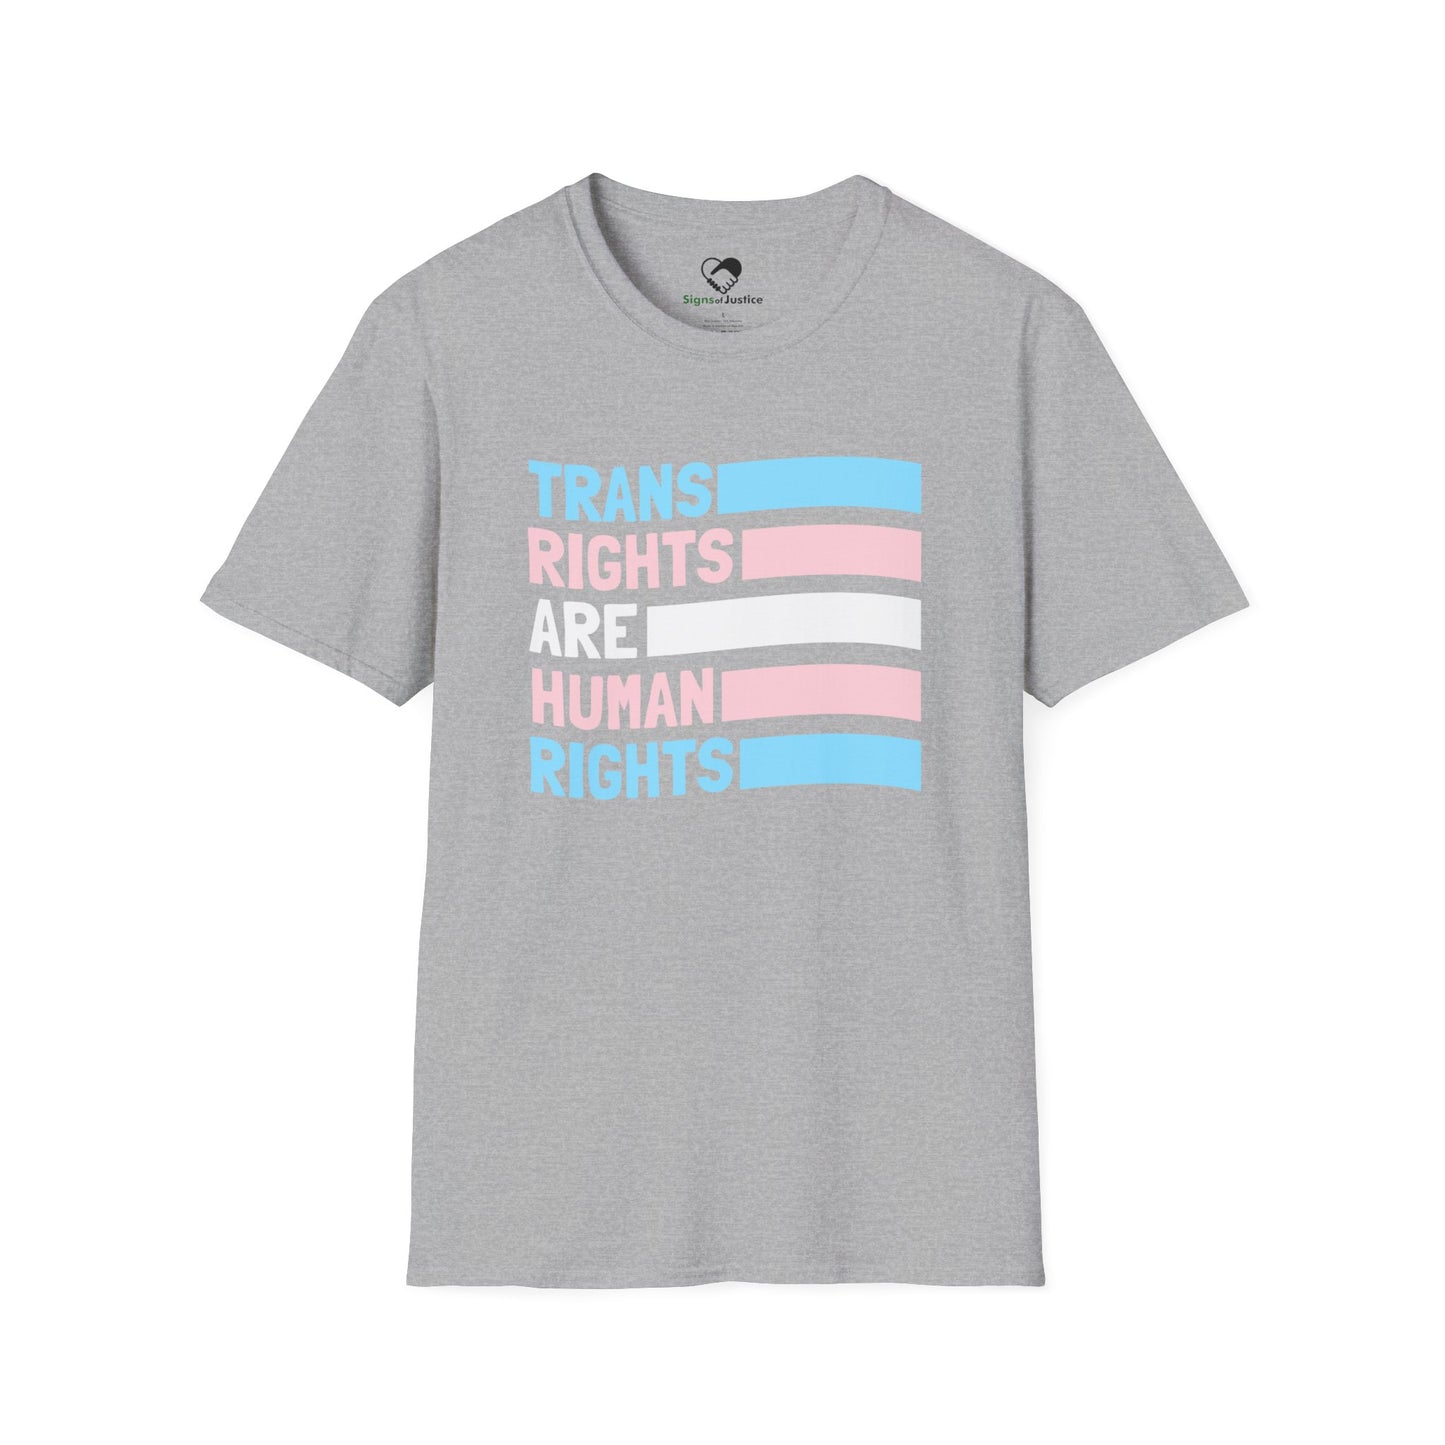 “Trans Rights Are Human Rights” Unisex T-Shirt